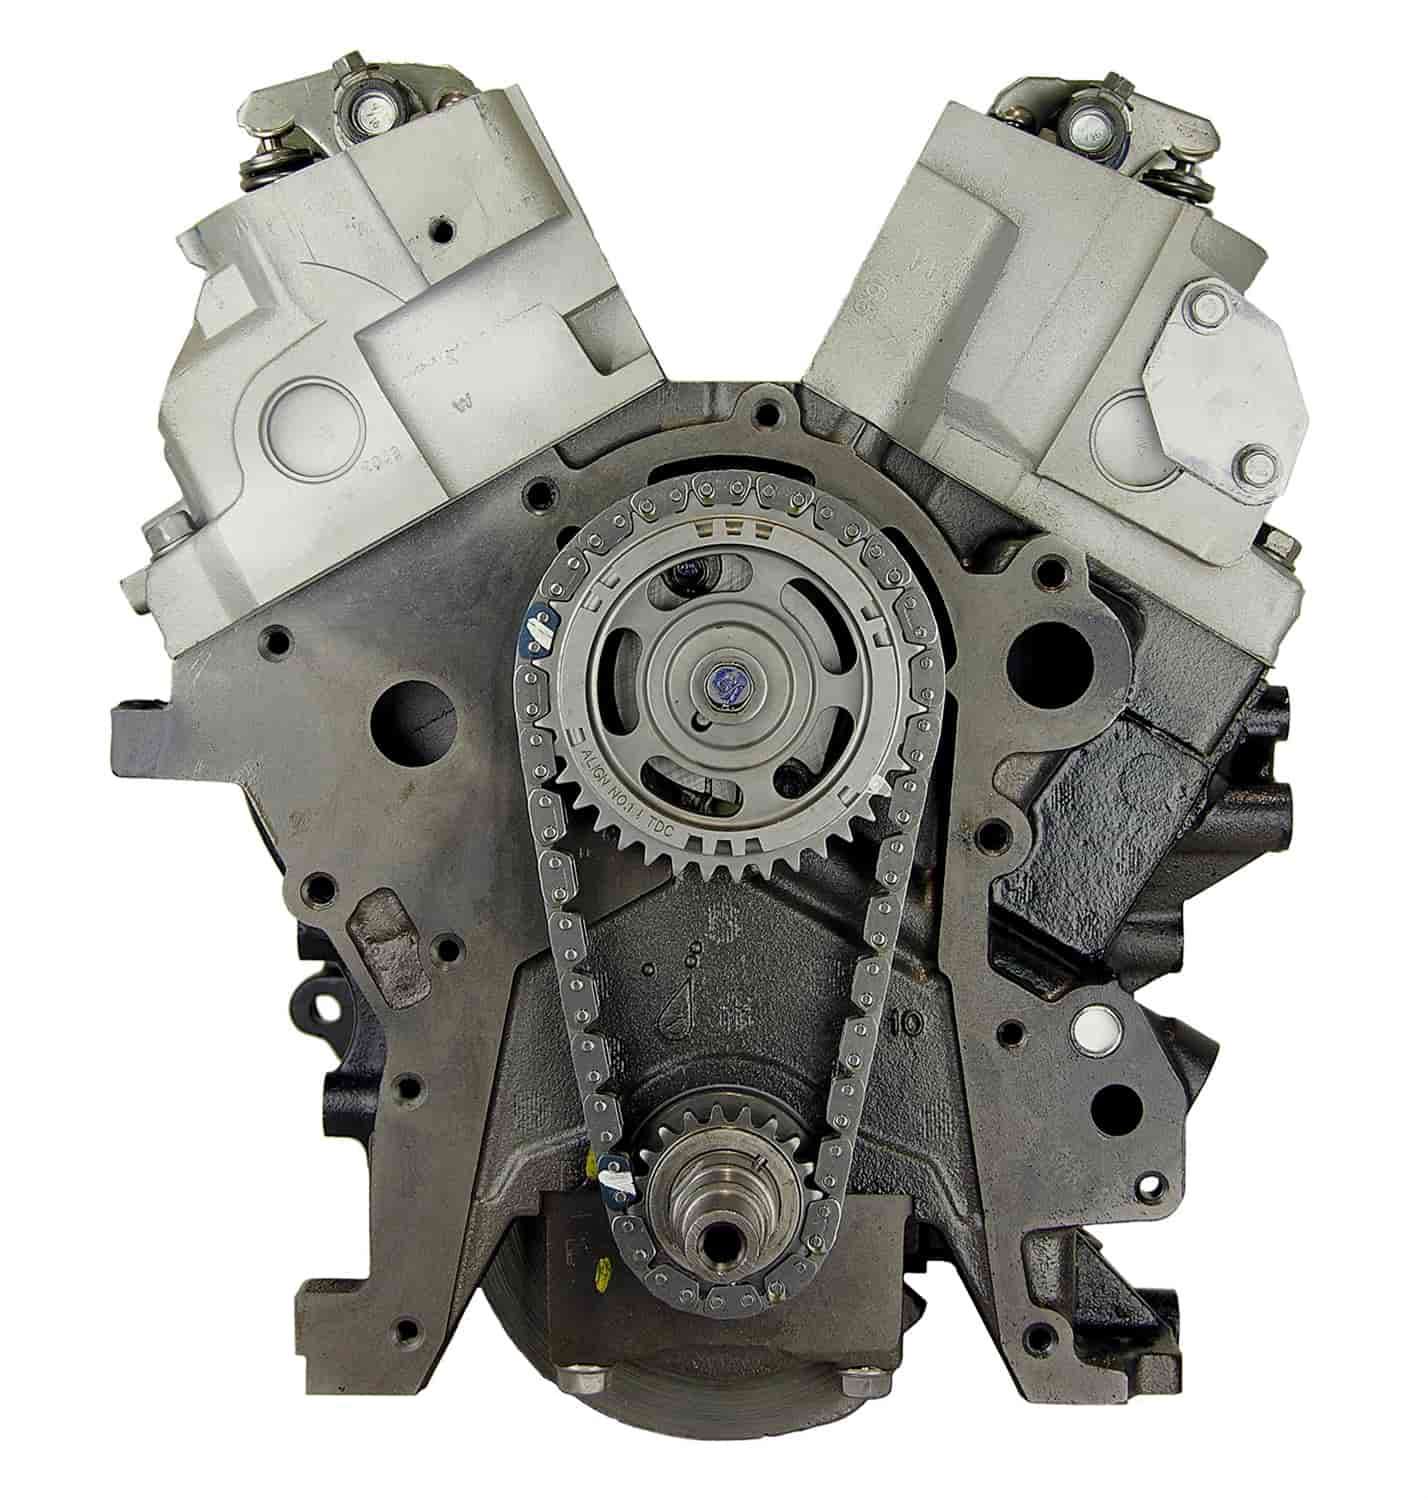 Remanufactured Crate Engine for 2005 Chrysler Pacifica with 3.8L V6